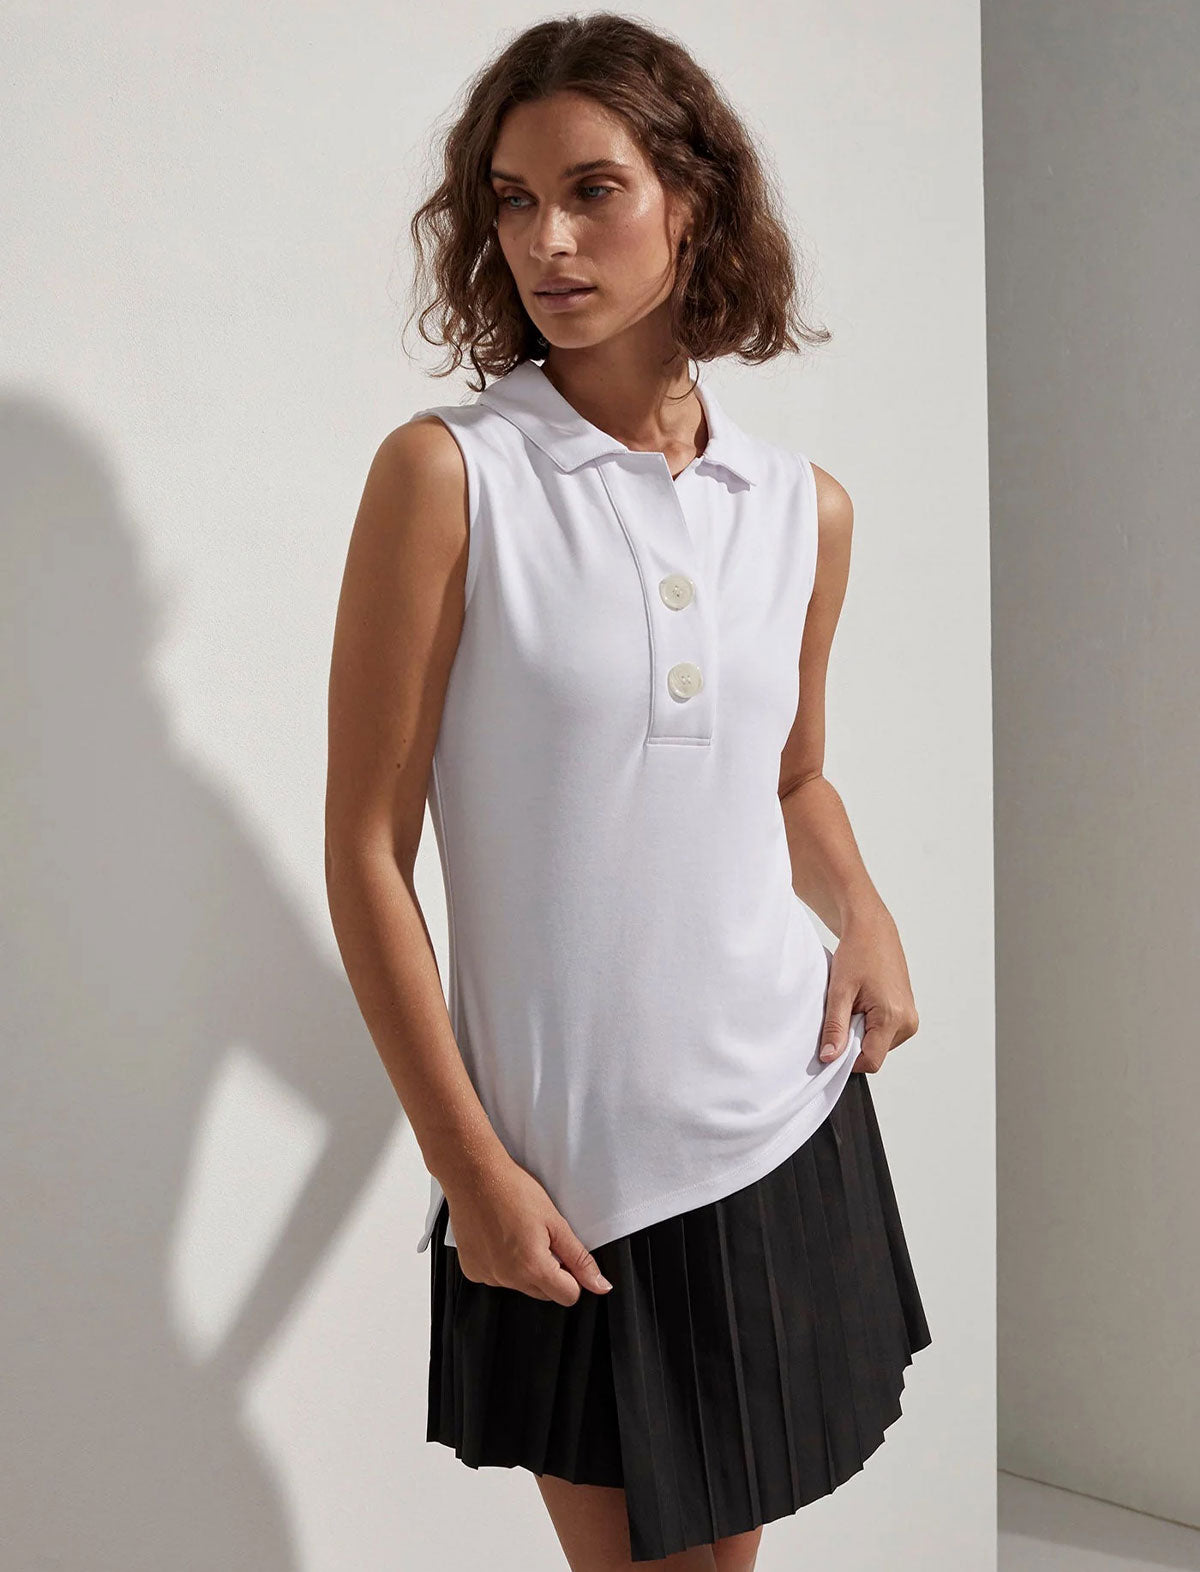 VARLEY Caine Sleeveless Polo Jersey Top In White